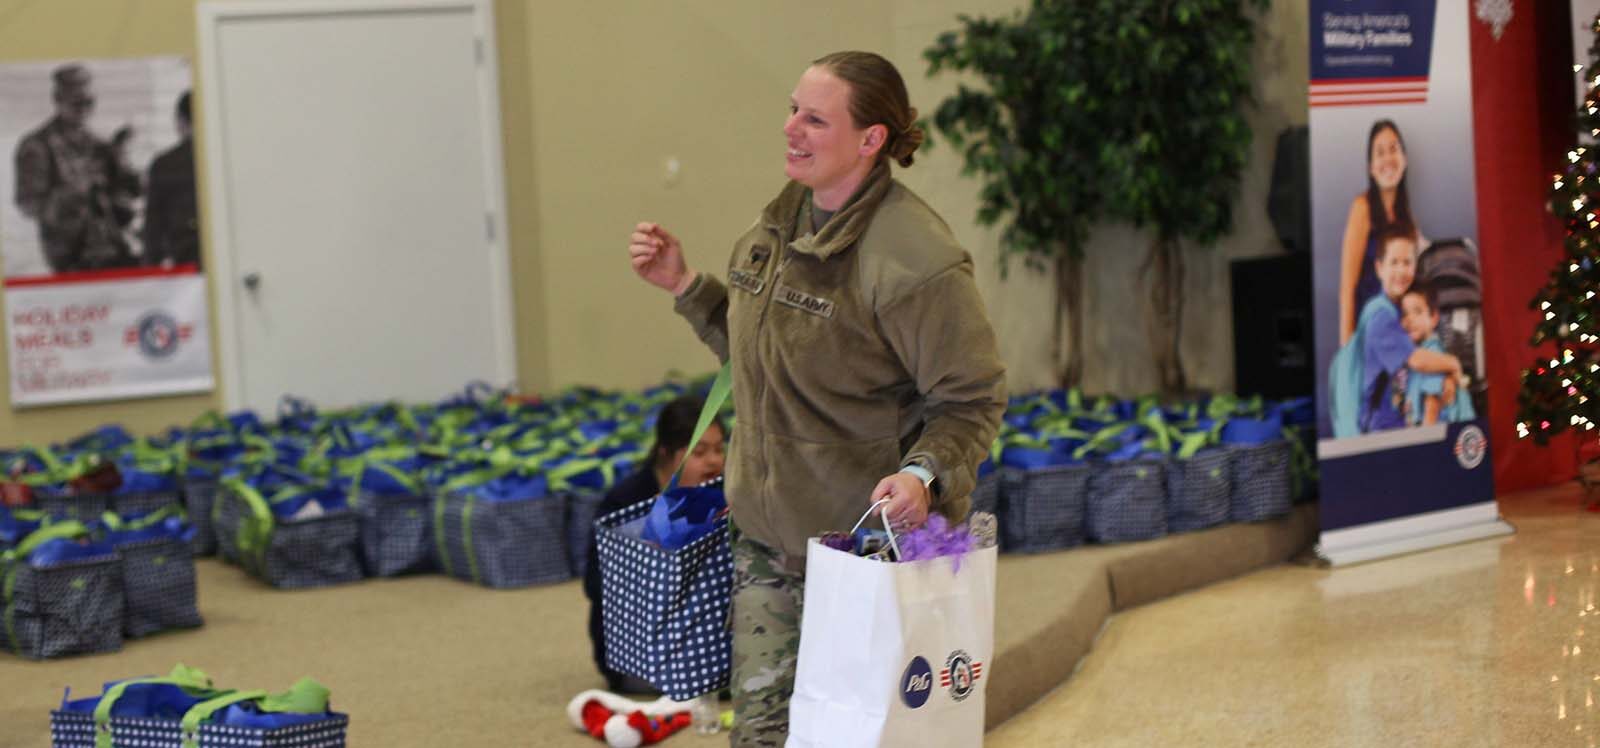 Service member carrying two bags full of food at a Holiday Meals for Military event.